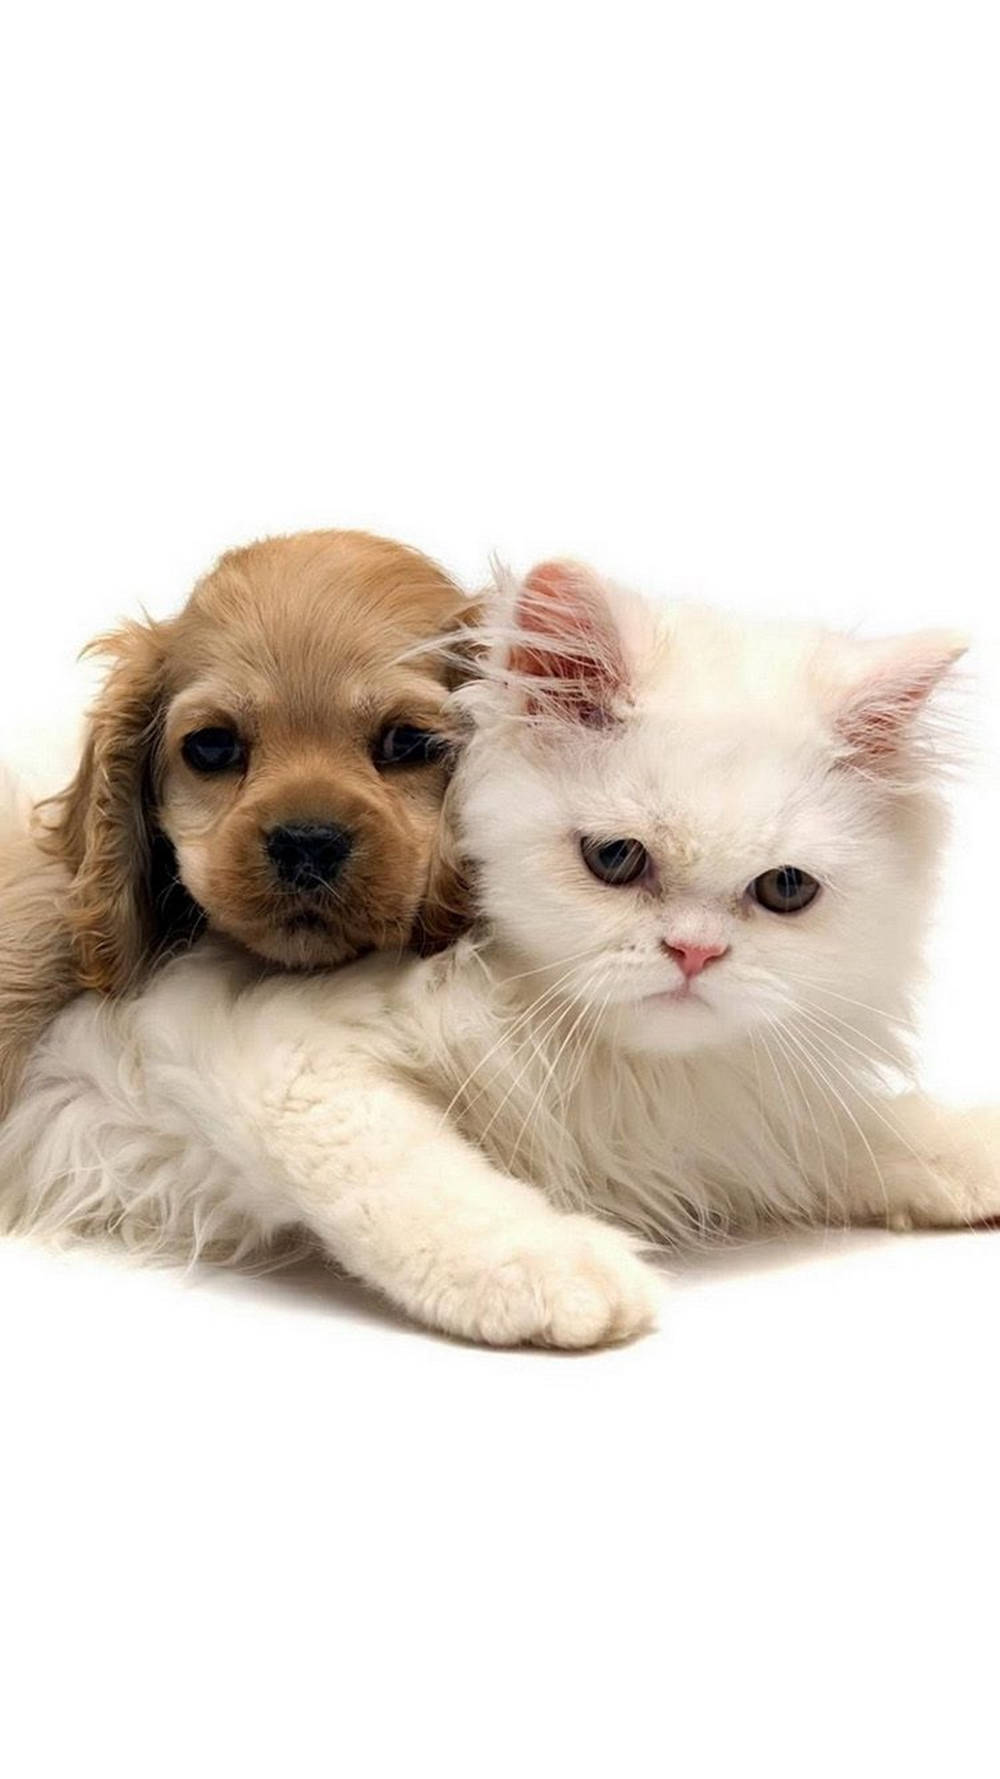 Sweet Spaniel Dog And Persian Cat Iphone Background